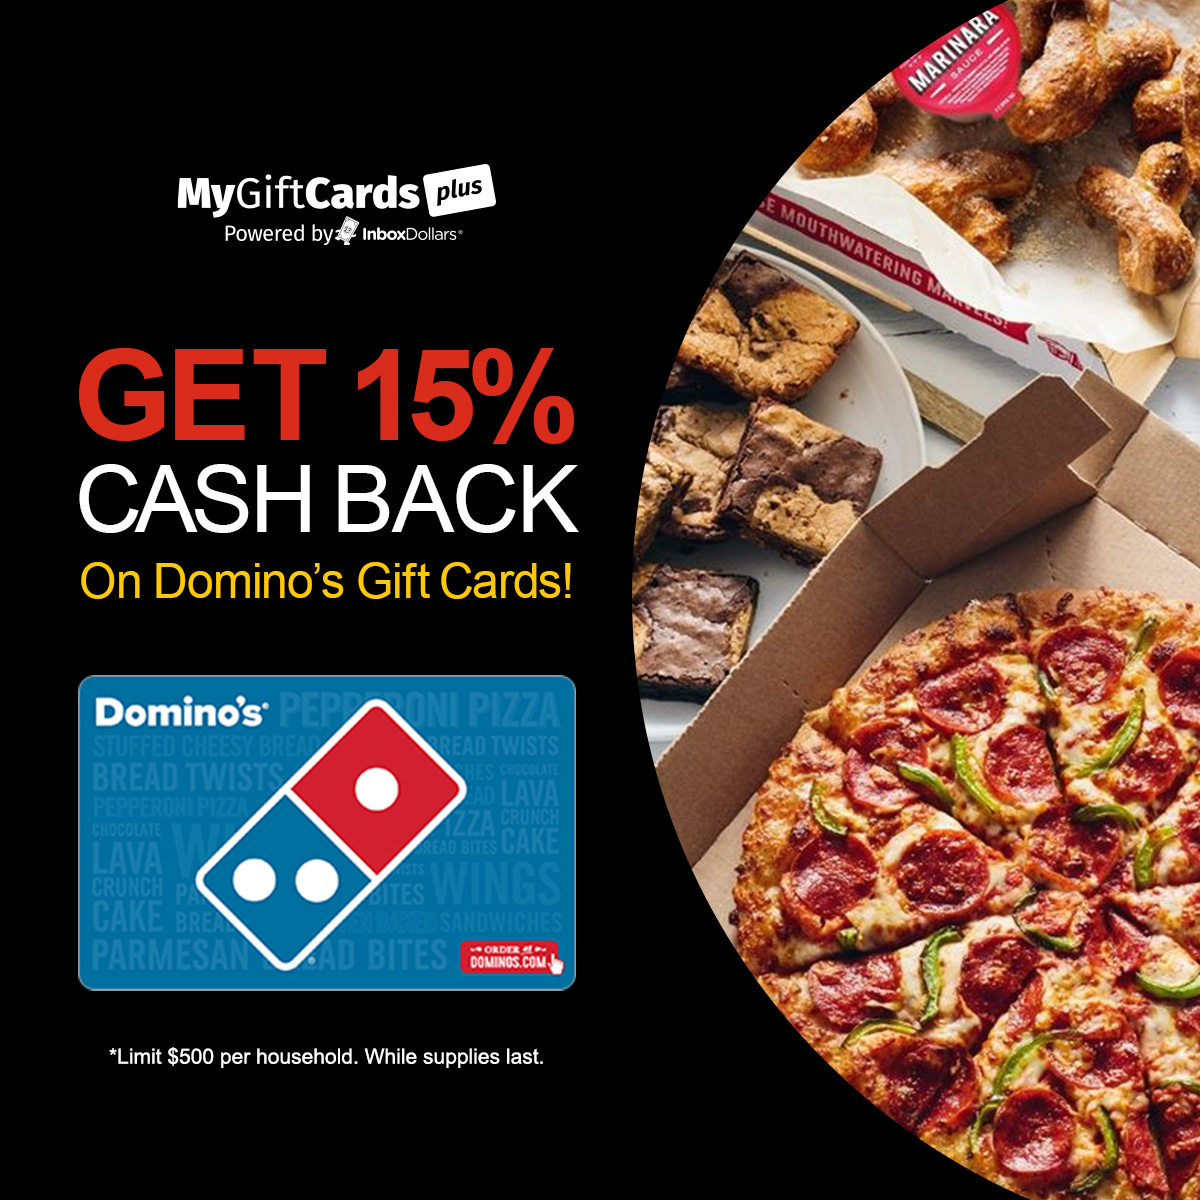 ⭐ WinIt Code⭐

Get 15% Cash Back when you buy Domino's gift cards from MyGiftCardsPlus. 

Redeem the WinIt code: DOMINOSYUM by 11:59pm CT.

mygiftcardsplus.com/buy/Dominos-Pi…